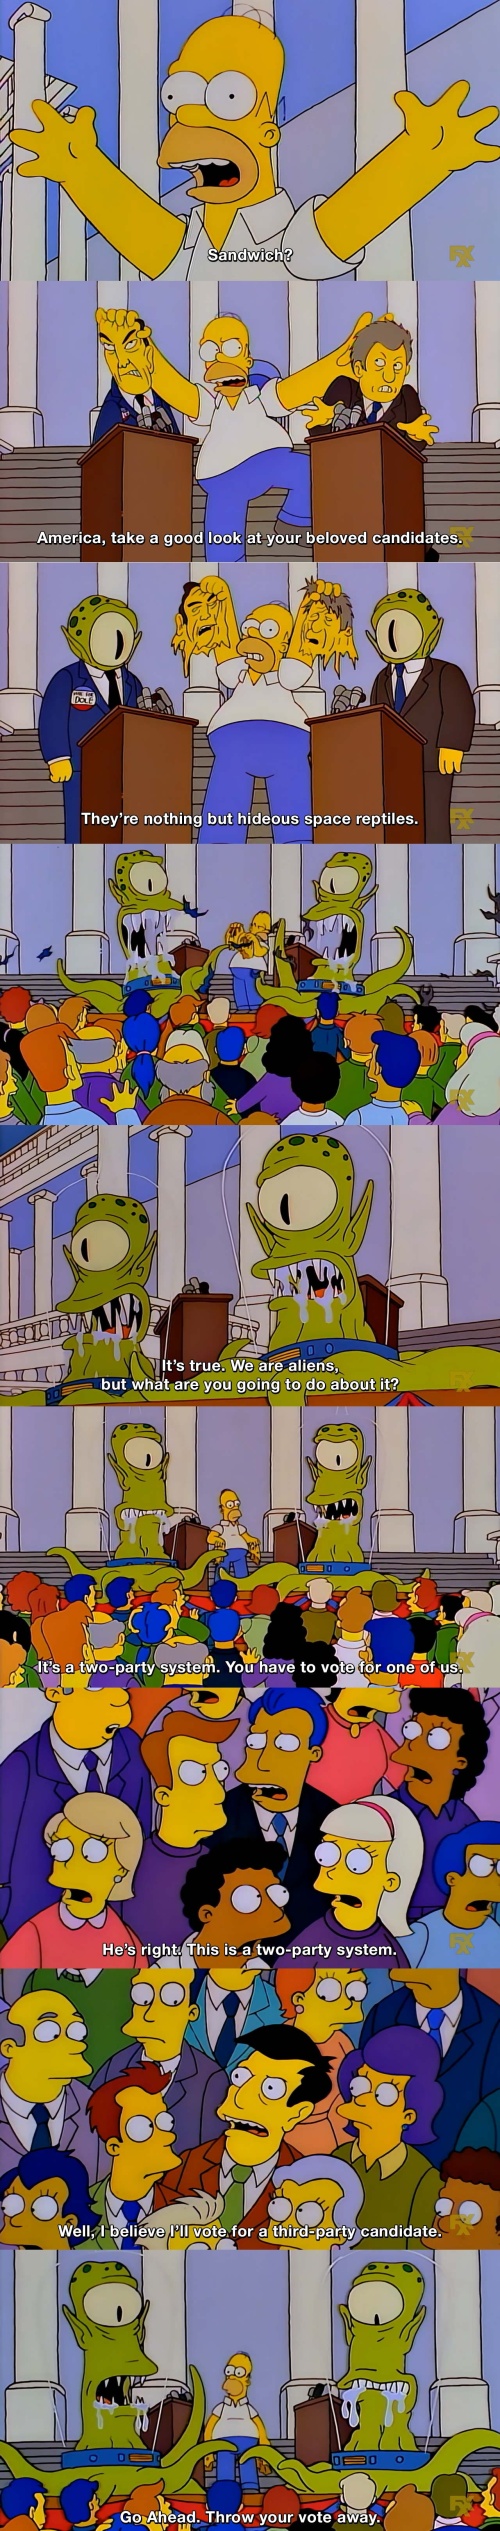 The Simpsons - This is a two-party system